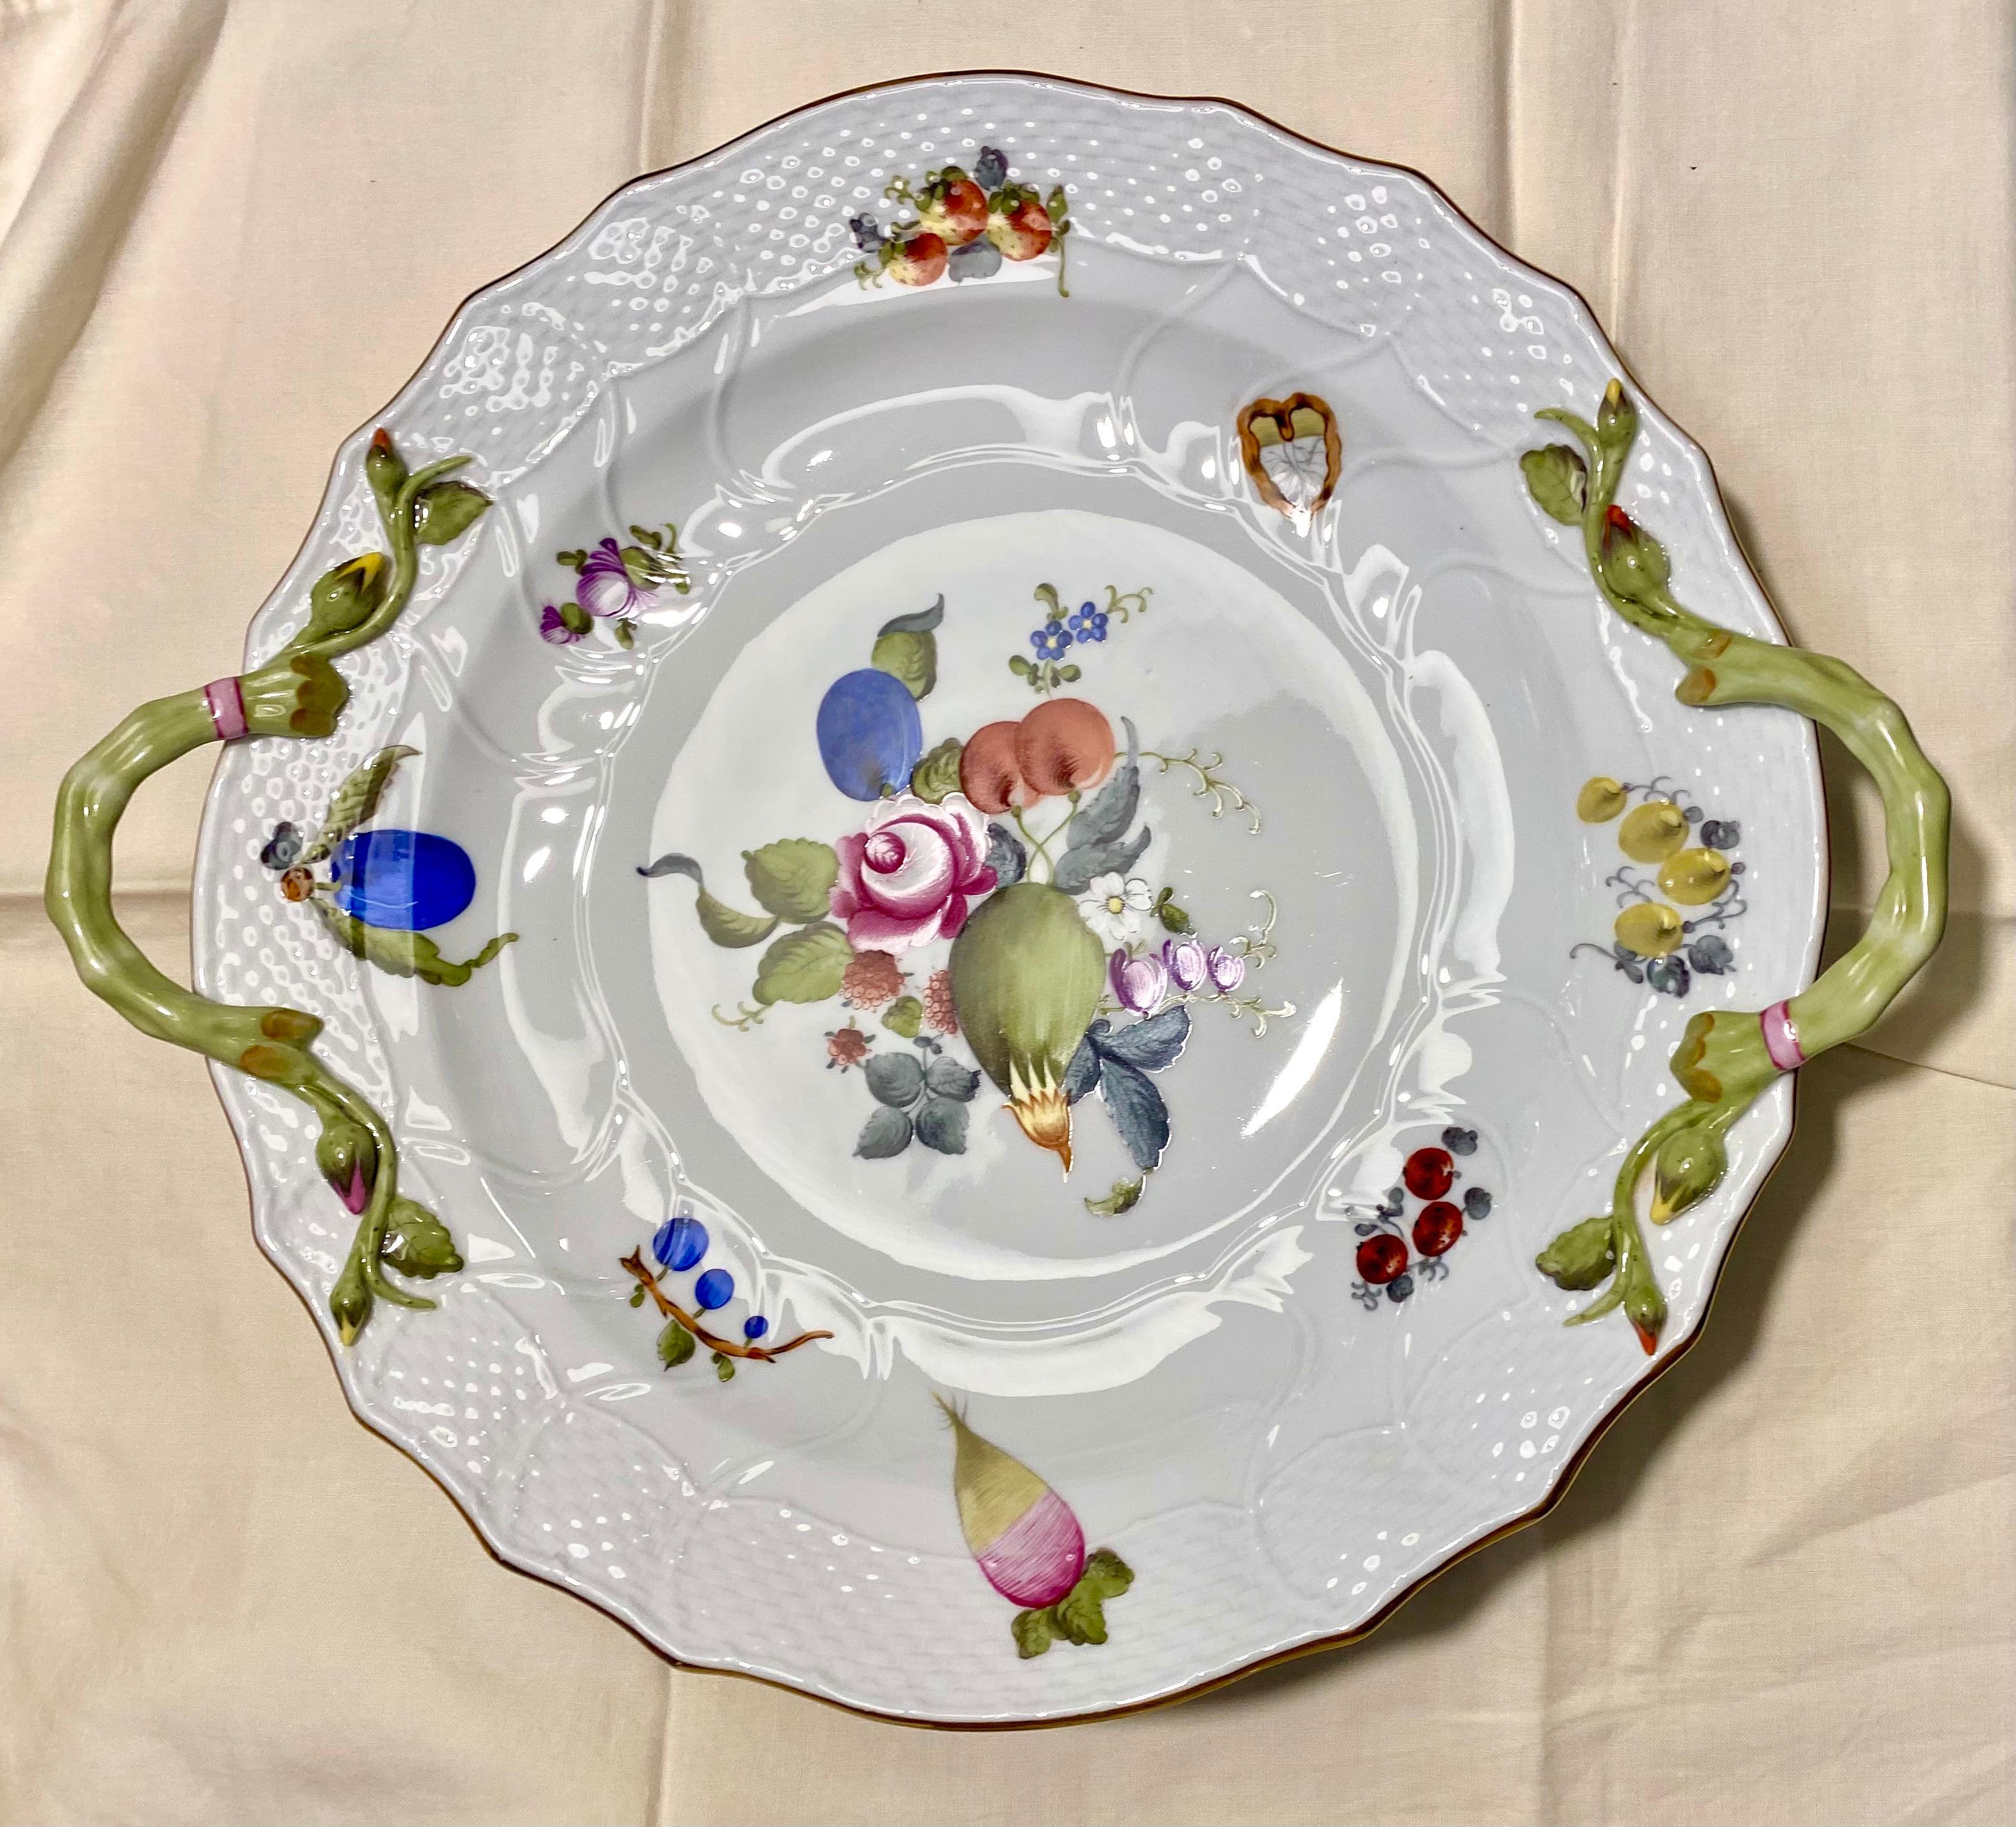 A beautiful Herend hand painted porcelain two handled platter or chop plate in the fruit and flower patter. Since its introduction in the 1860s this pattern, with its beautiful compositions of fruits and flowers, has been favored by many royal